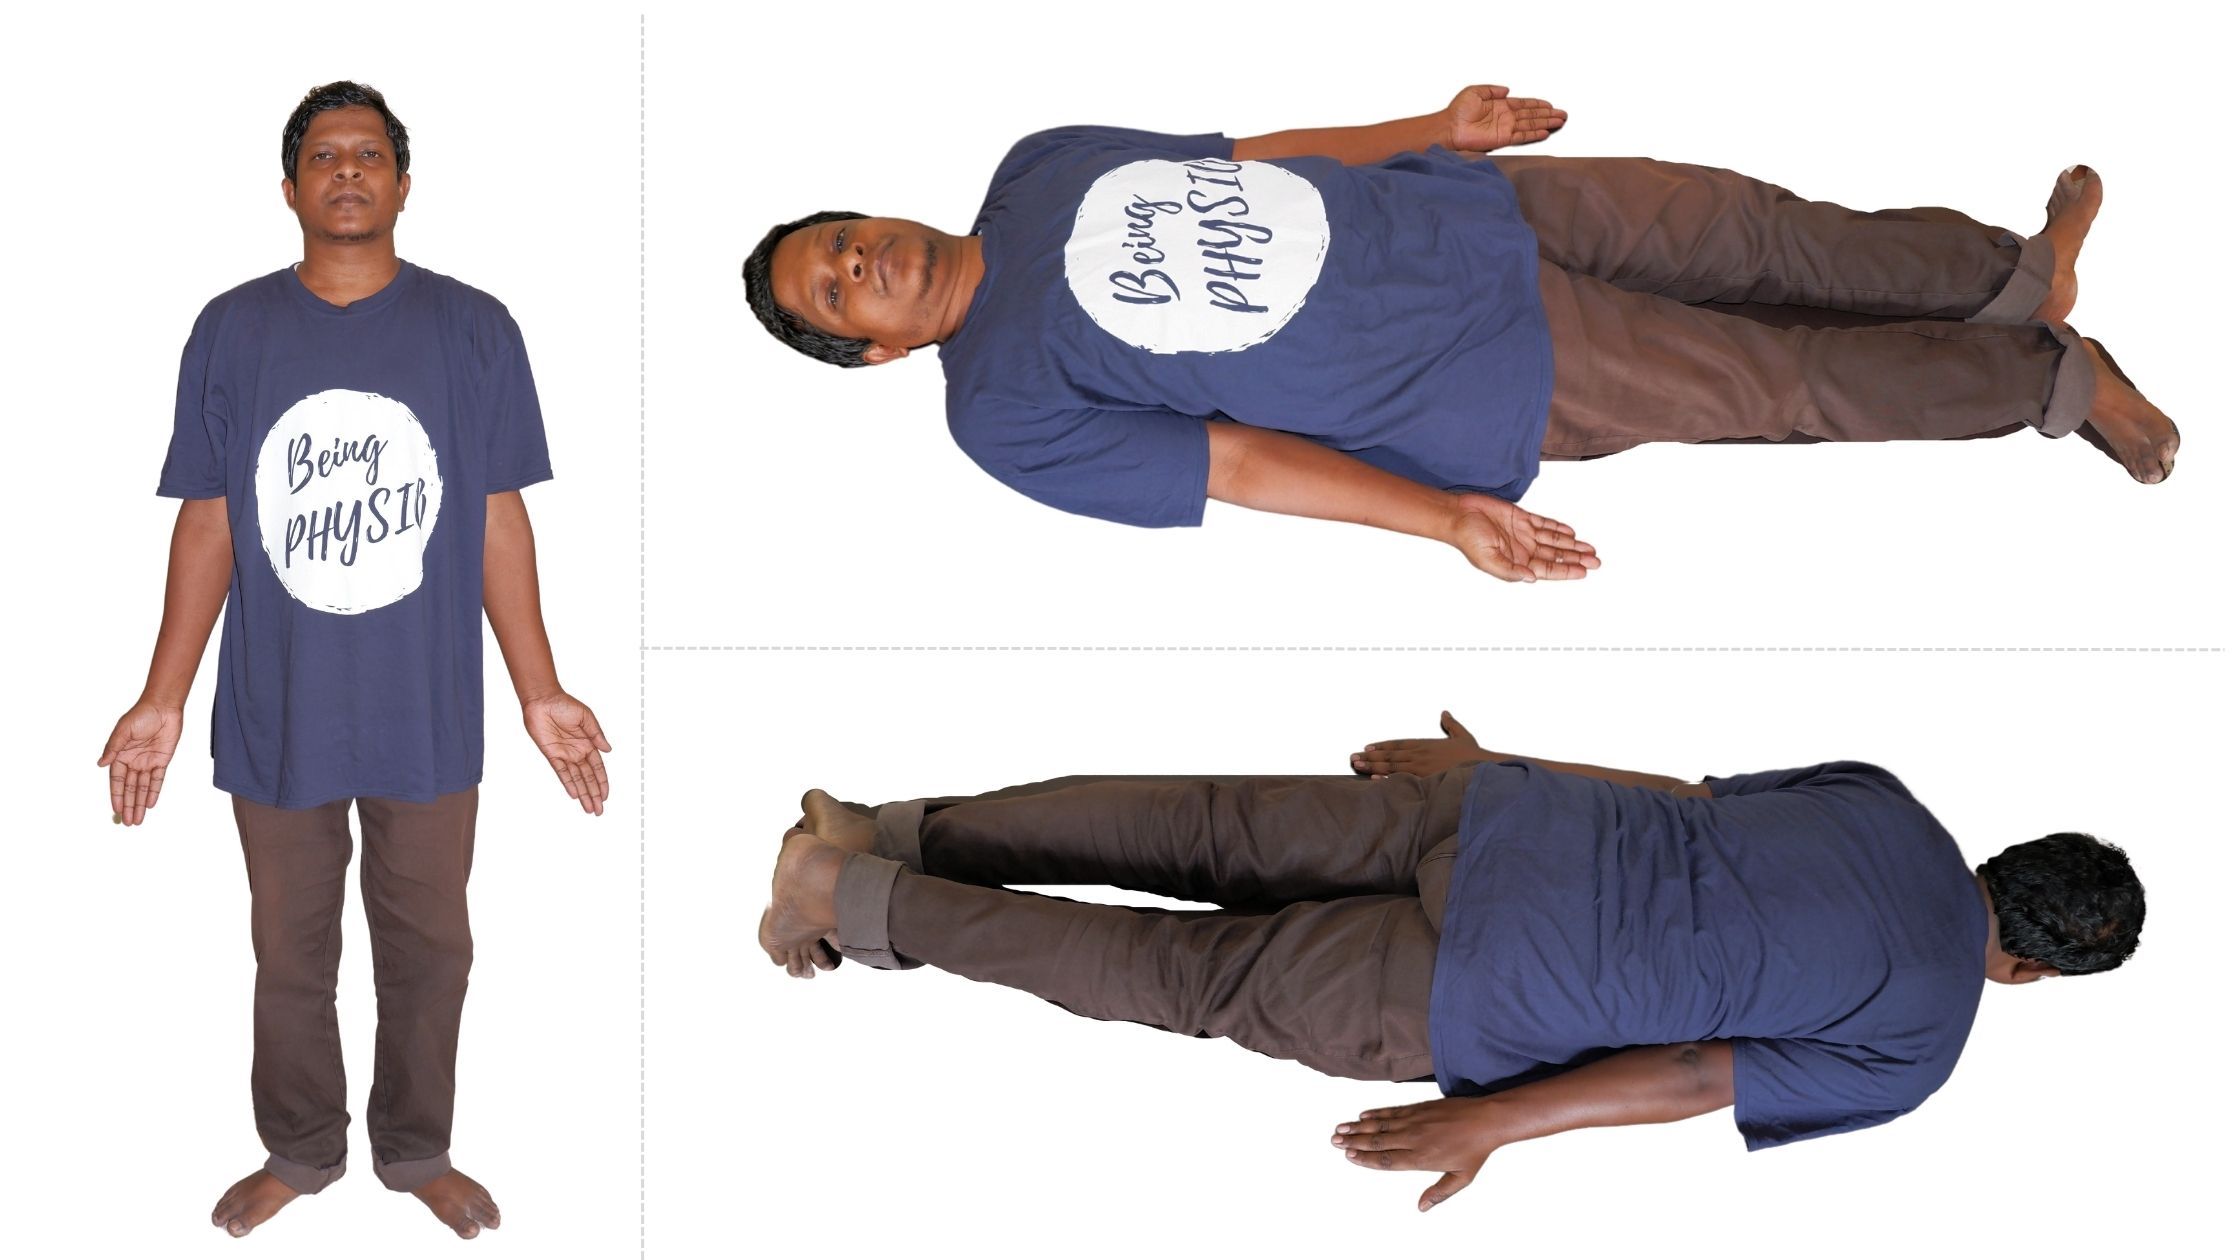 Supine Position, Anatomical Positions, Explained Practically